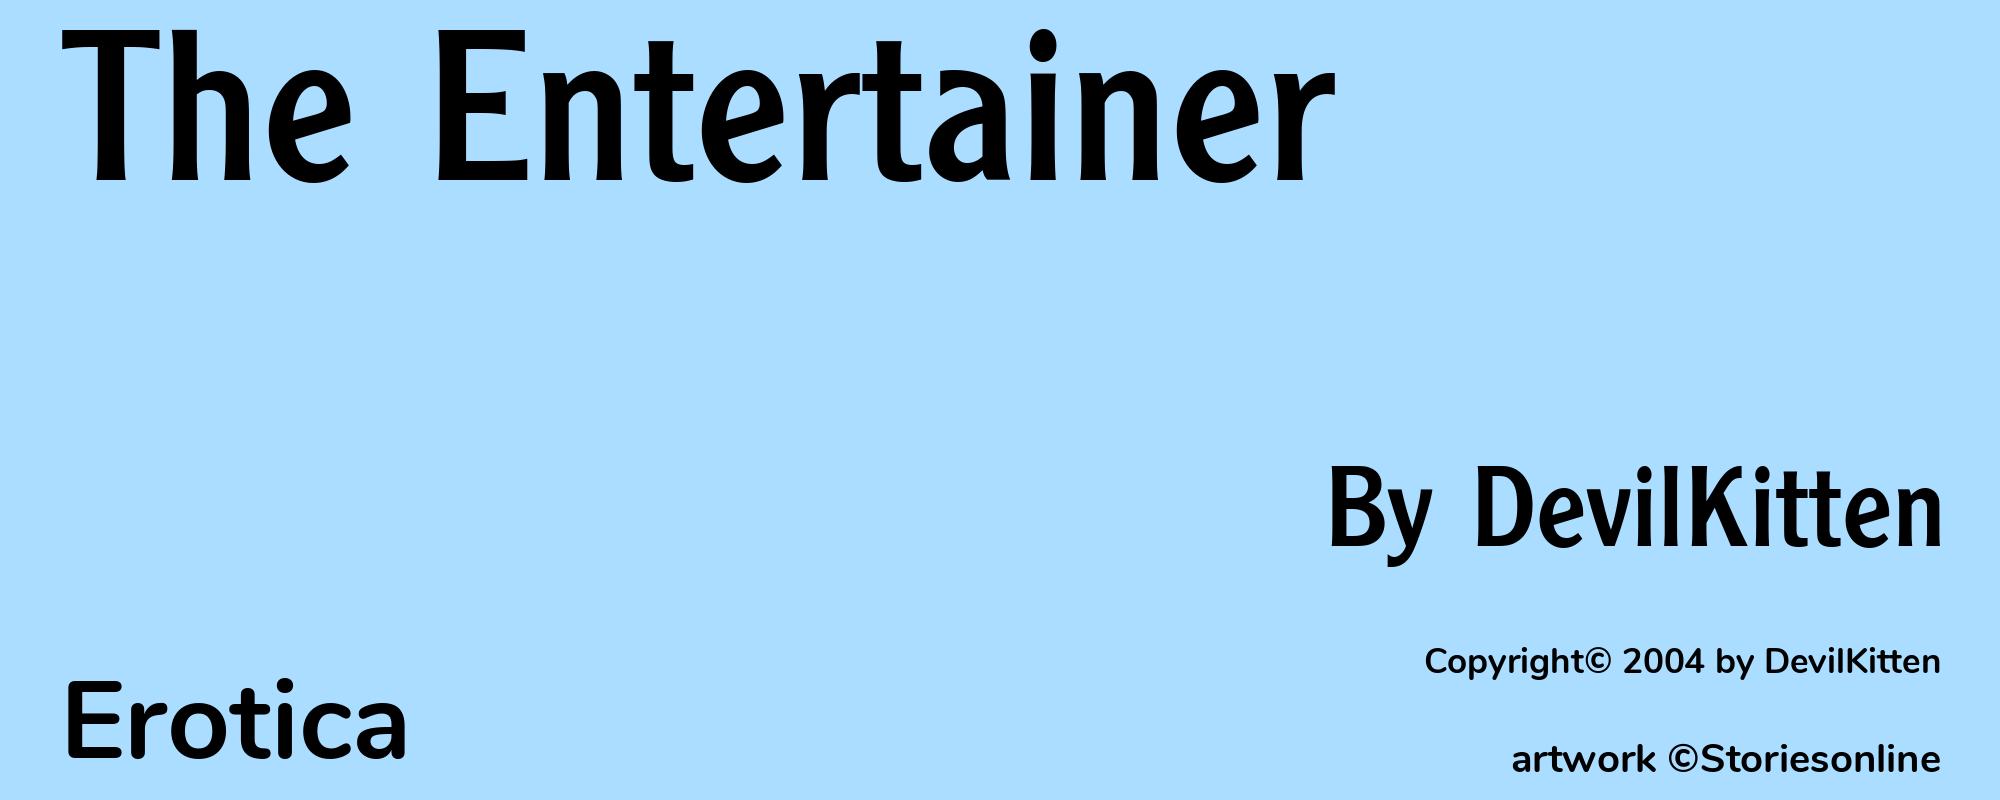 The Entertainer - Cover